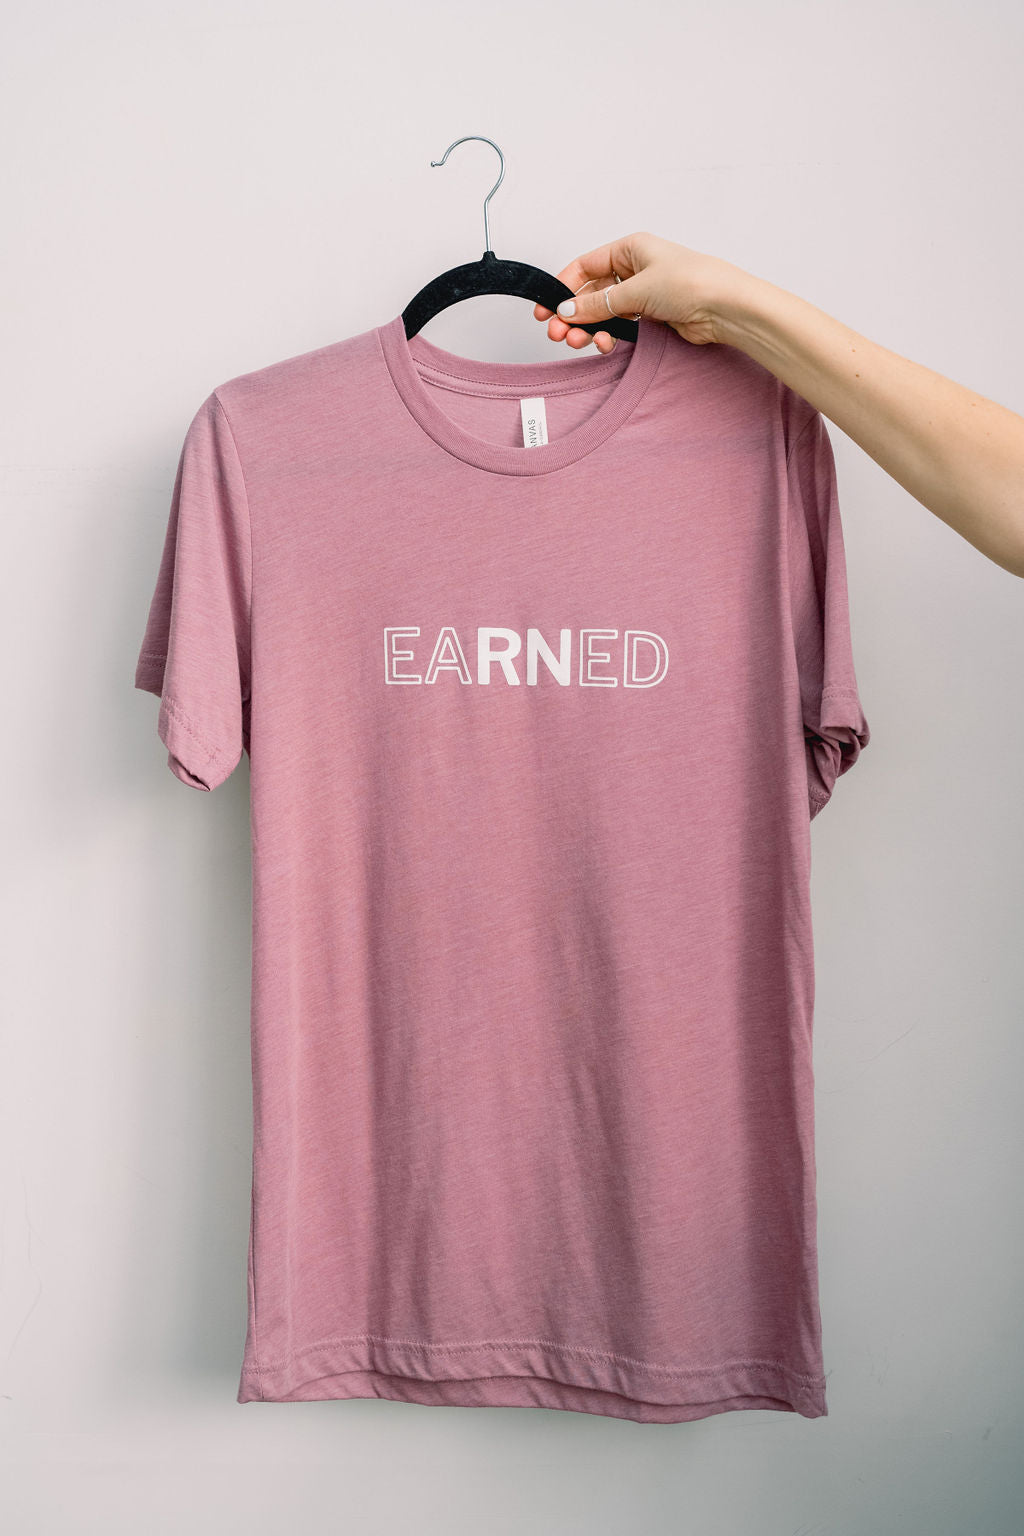 Earned Orchid Tee